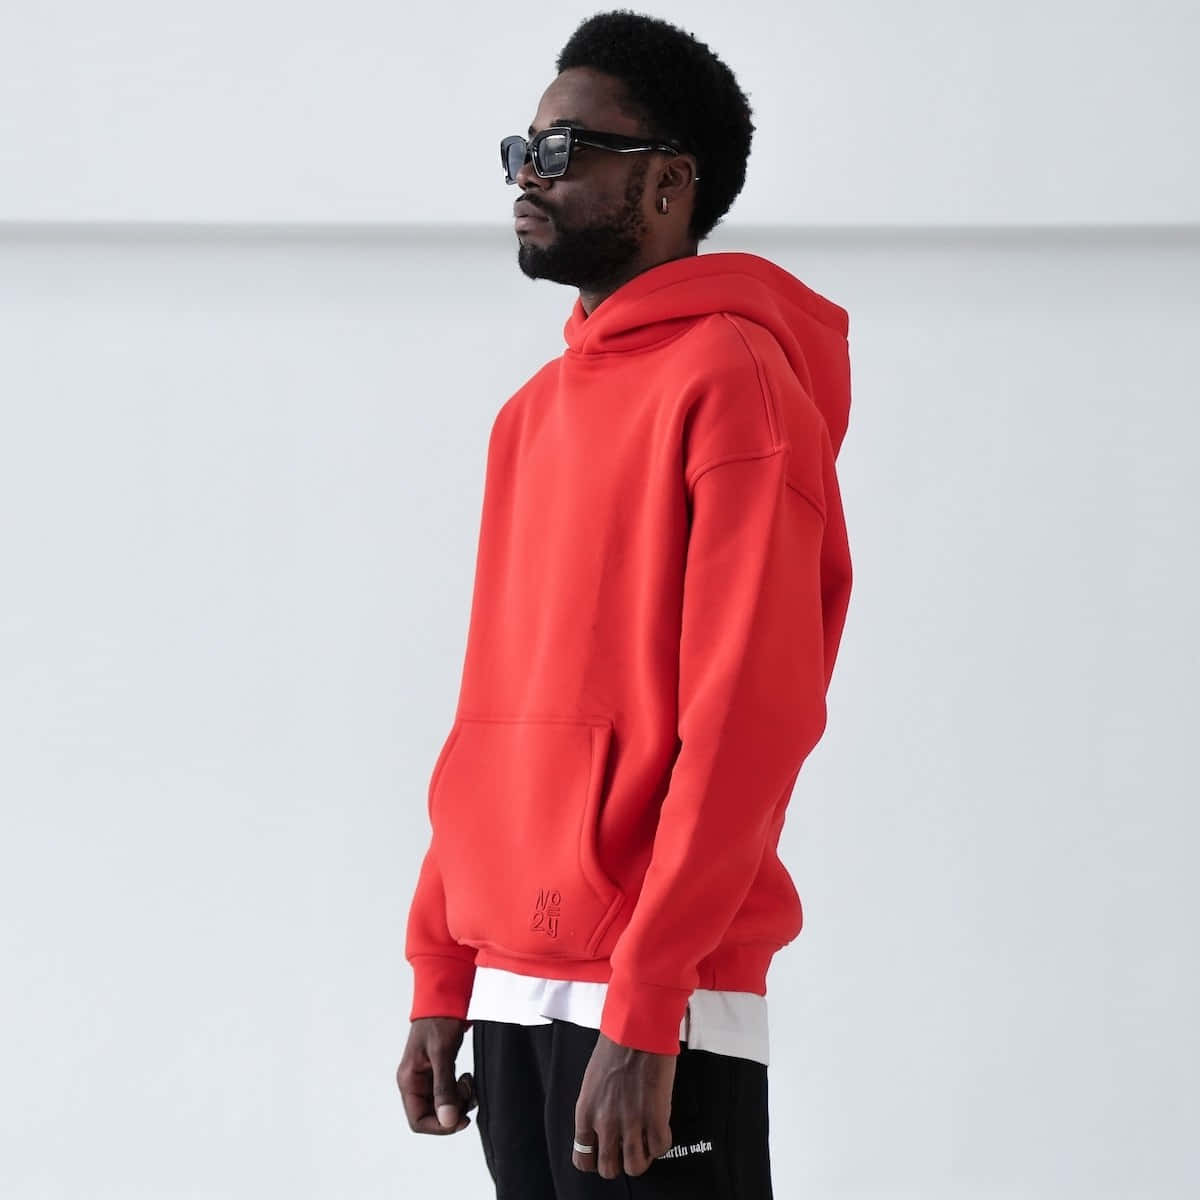 Stylish red hoodie worn by a modern individual Wallpaper